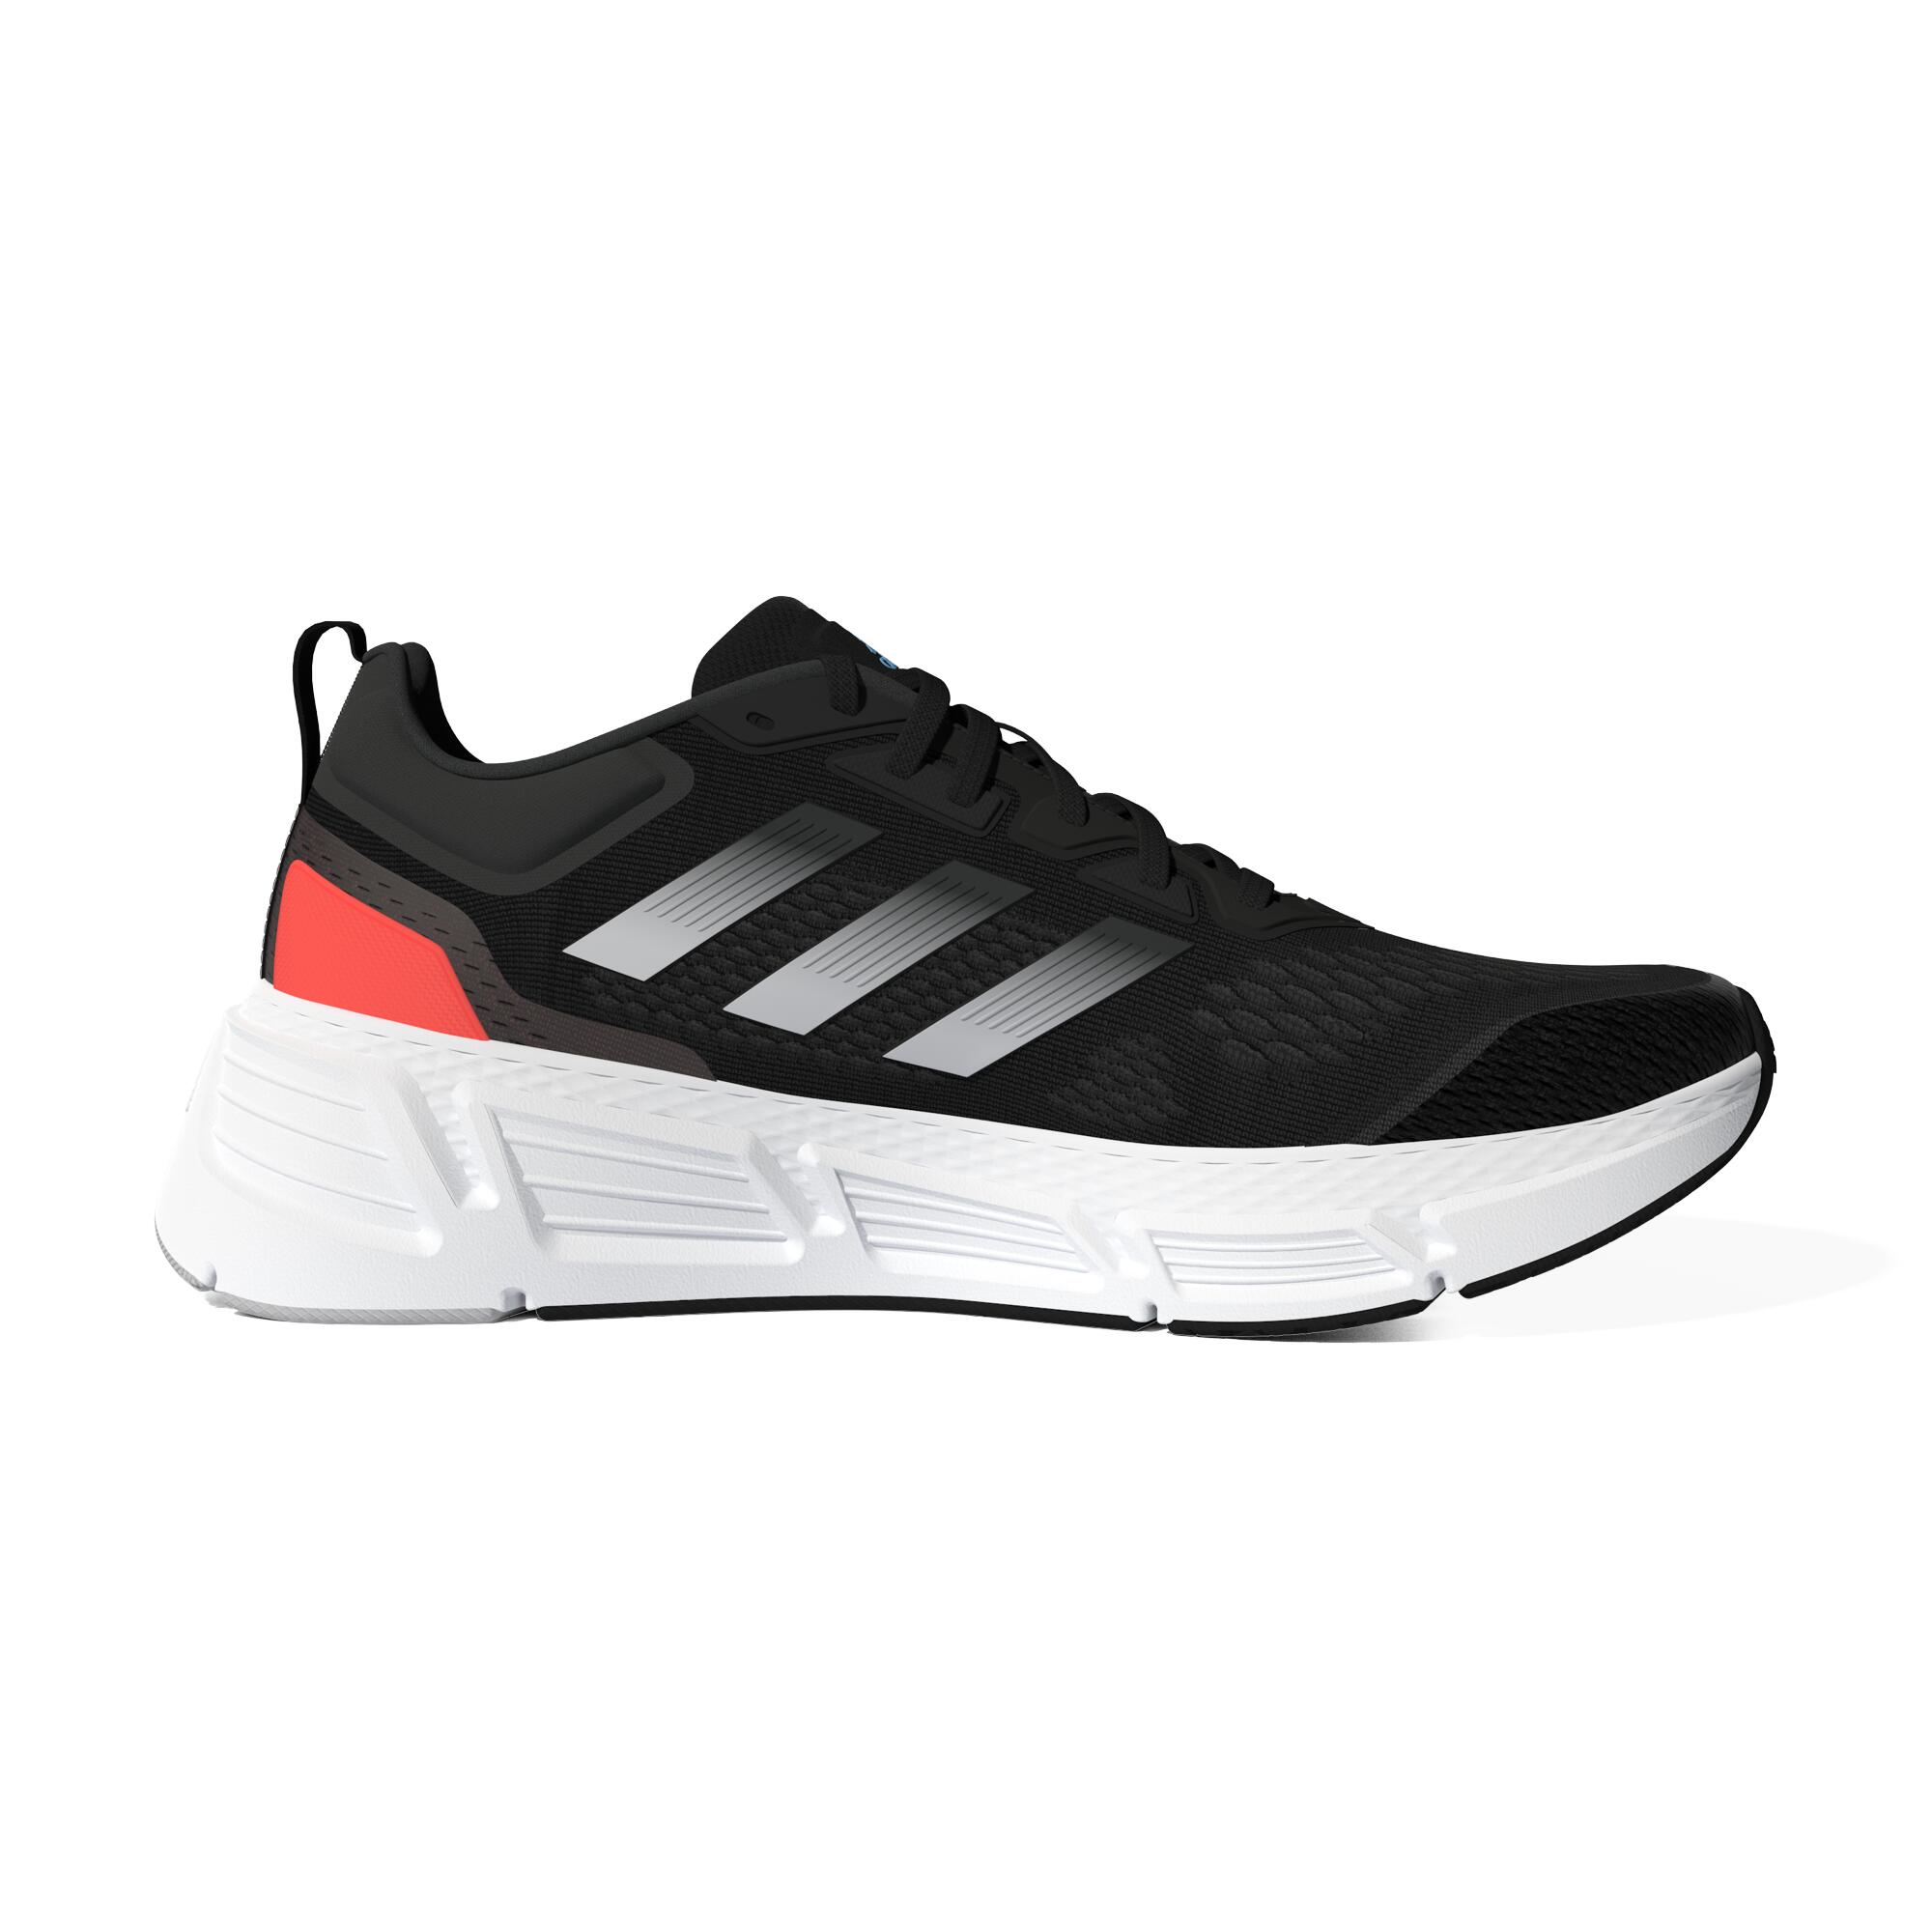 les chaussures pour hommes adidas شاحن سماعه